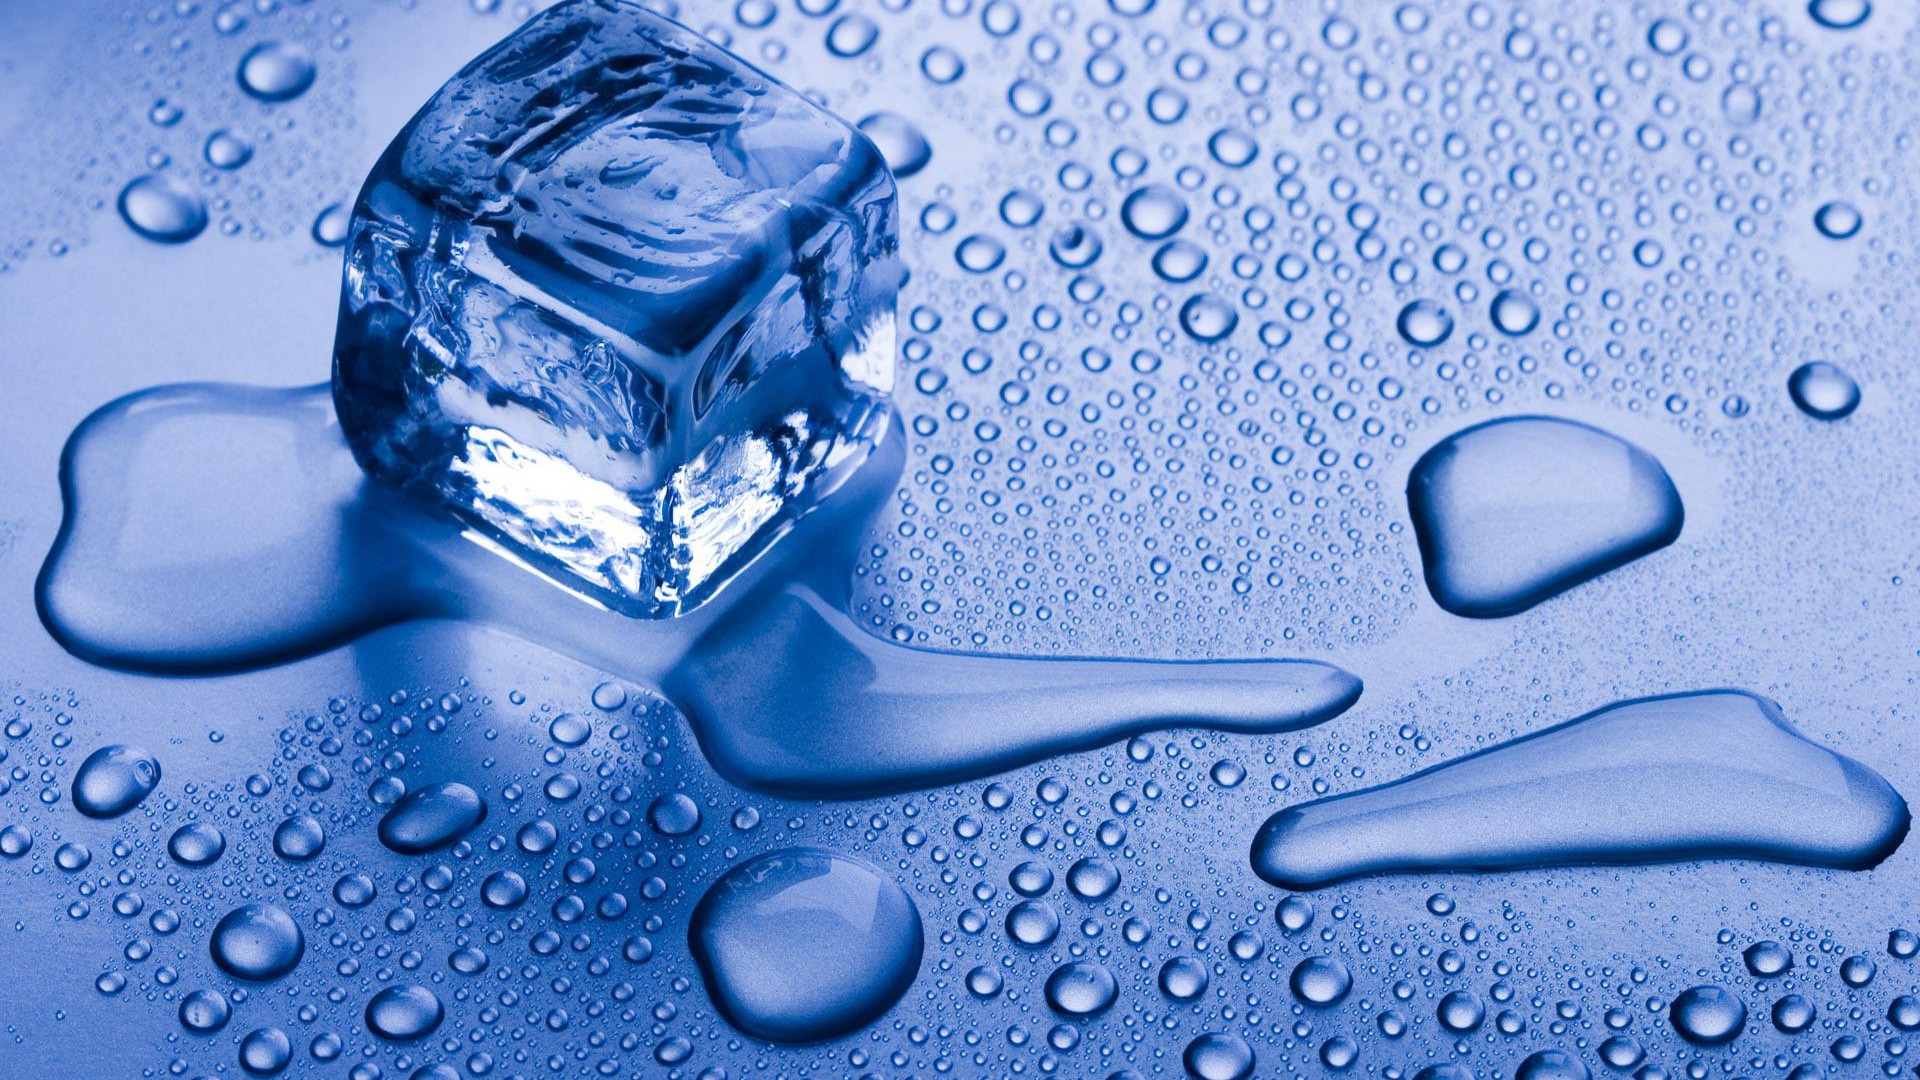 1920x1080 miscellaneous-melting-ice-cube-wallpaper